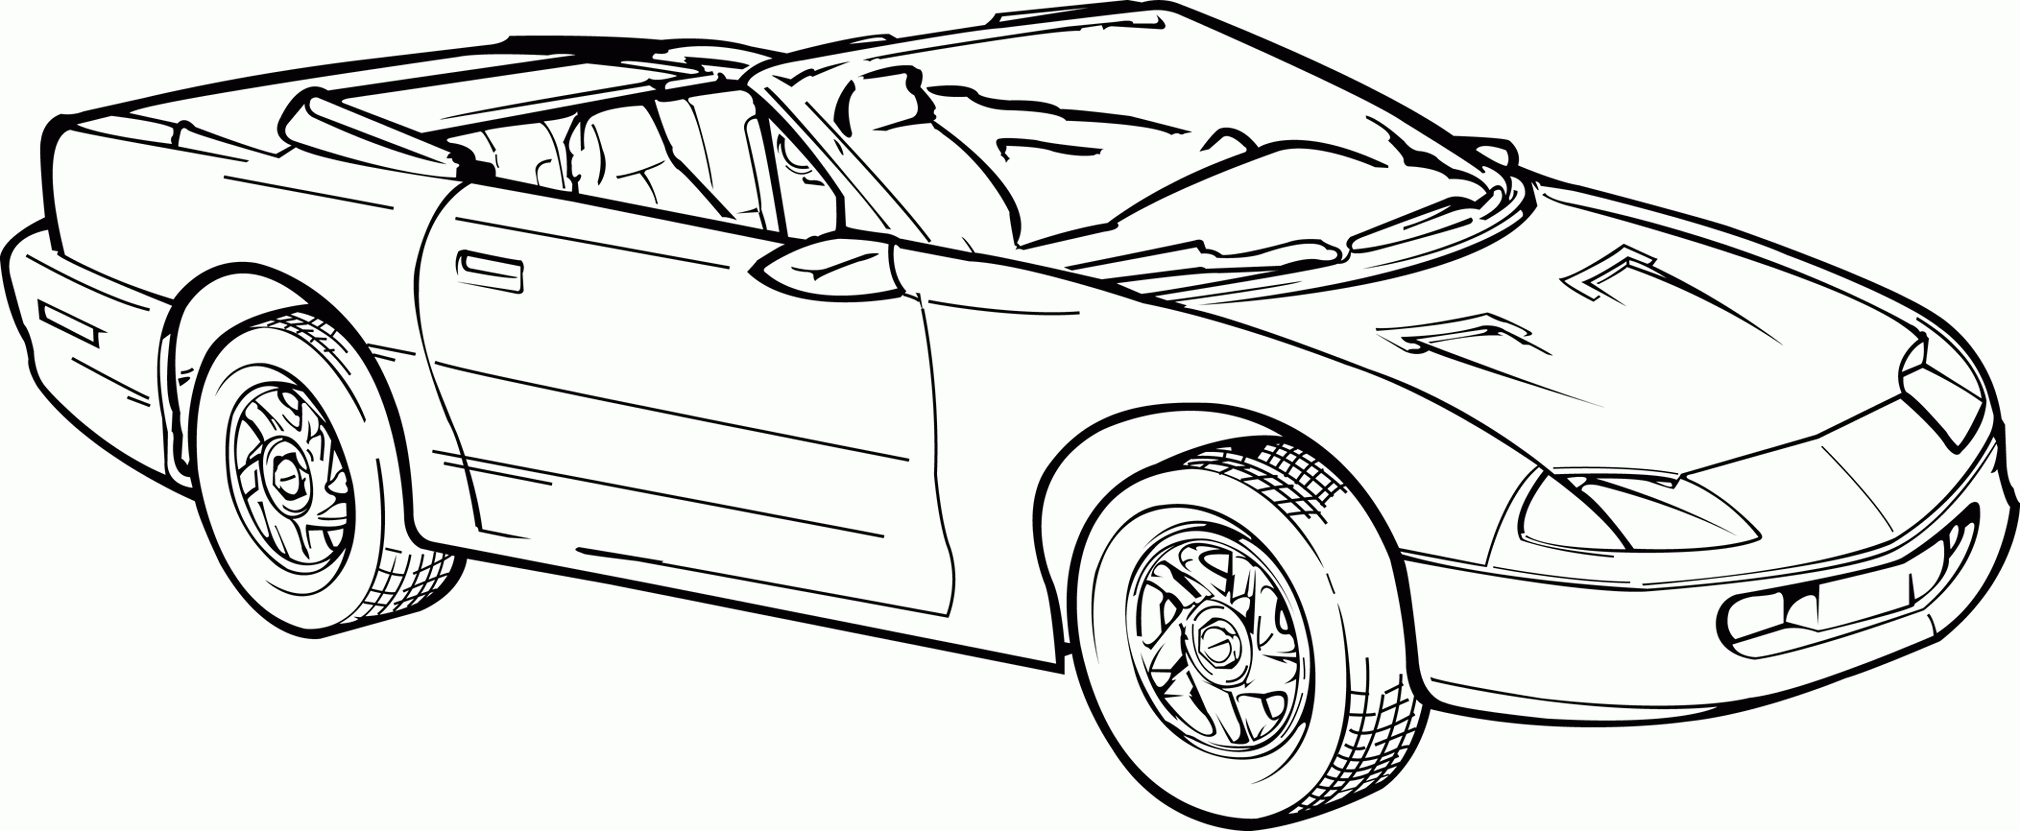 Camaro Coloring Pages Printable | High Quality Coloring Pages